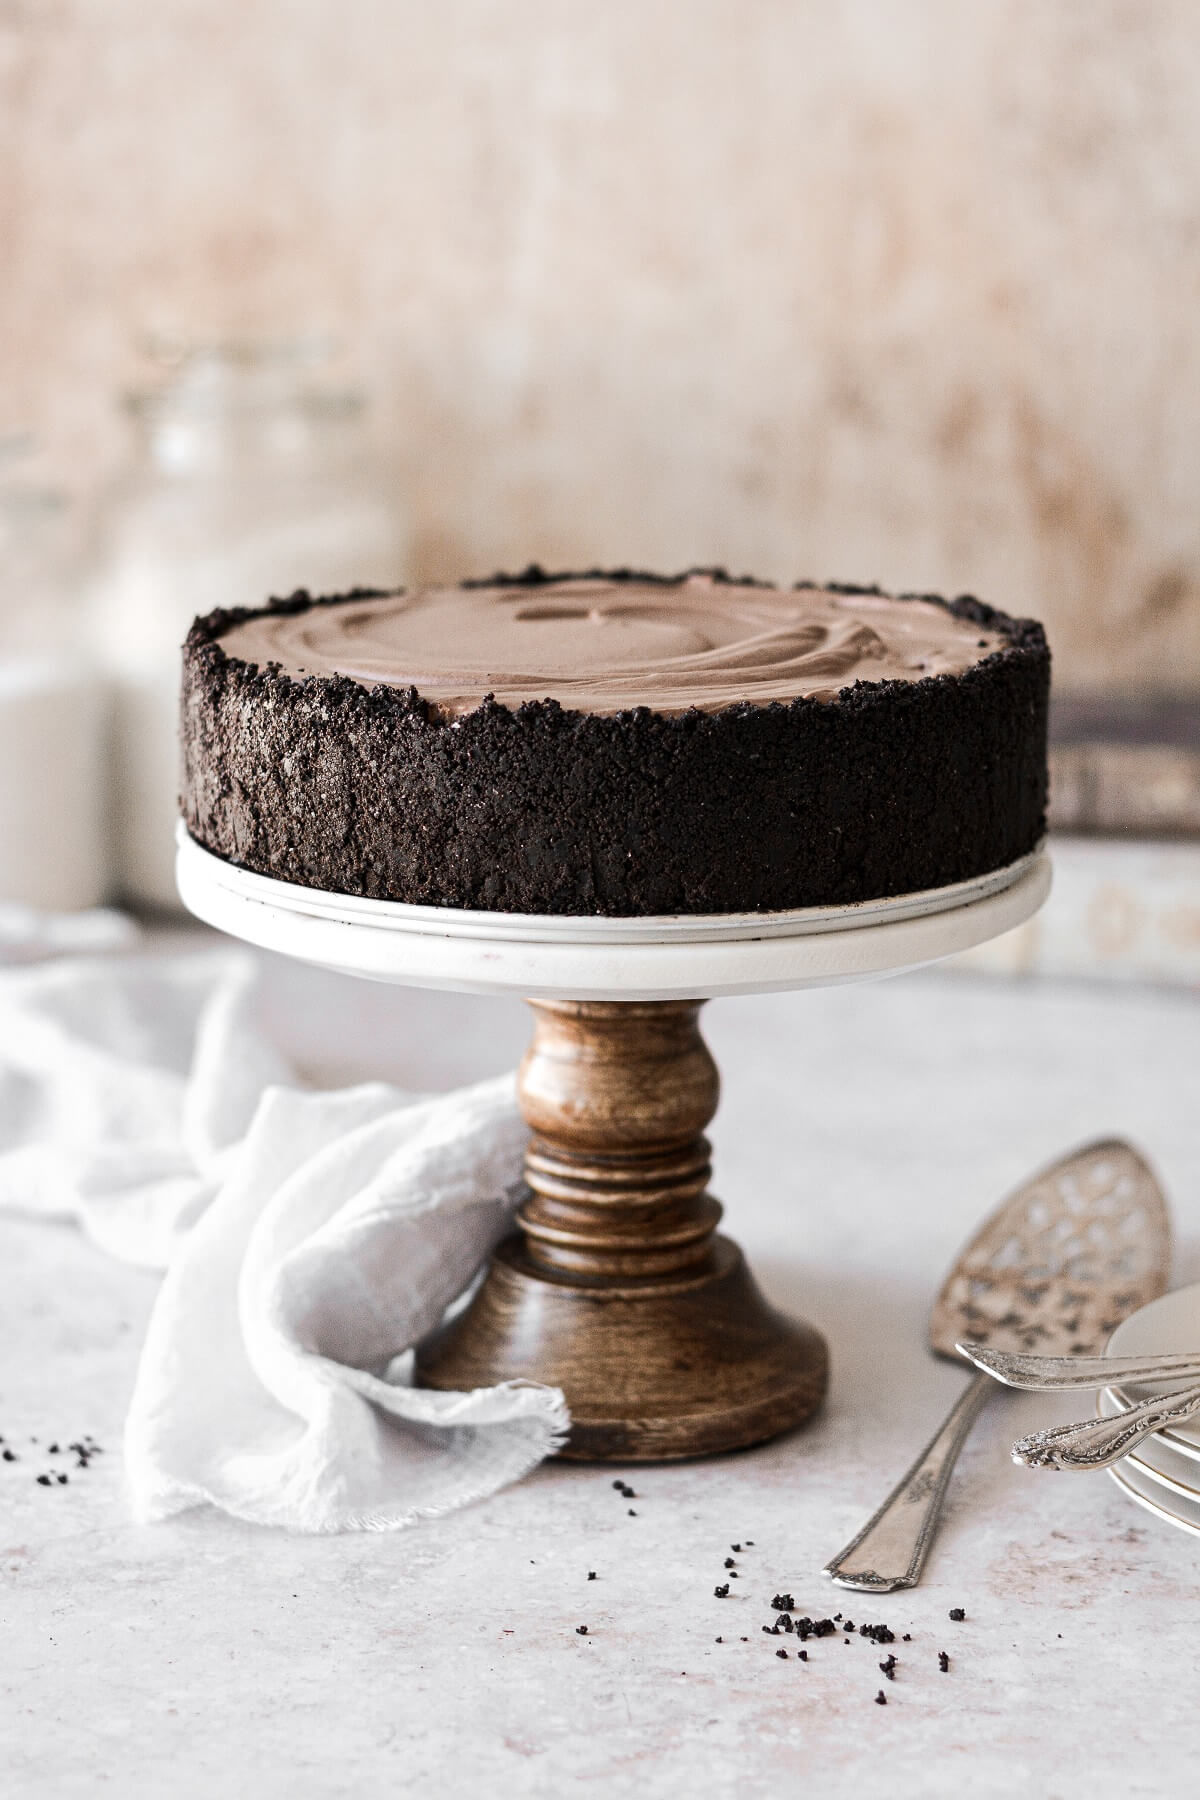 Chocolate cheesecake in a chocolate crust on a wood and marble cake stand.